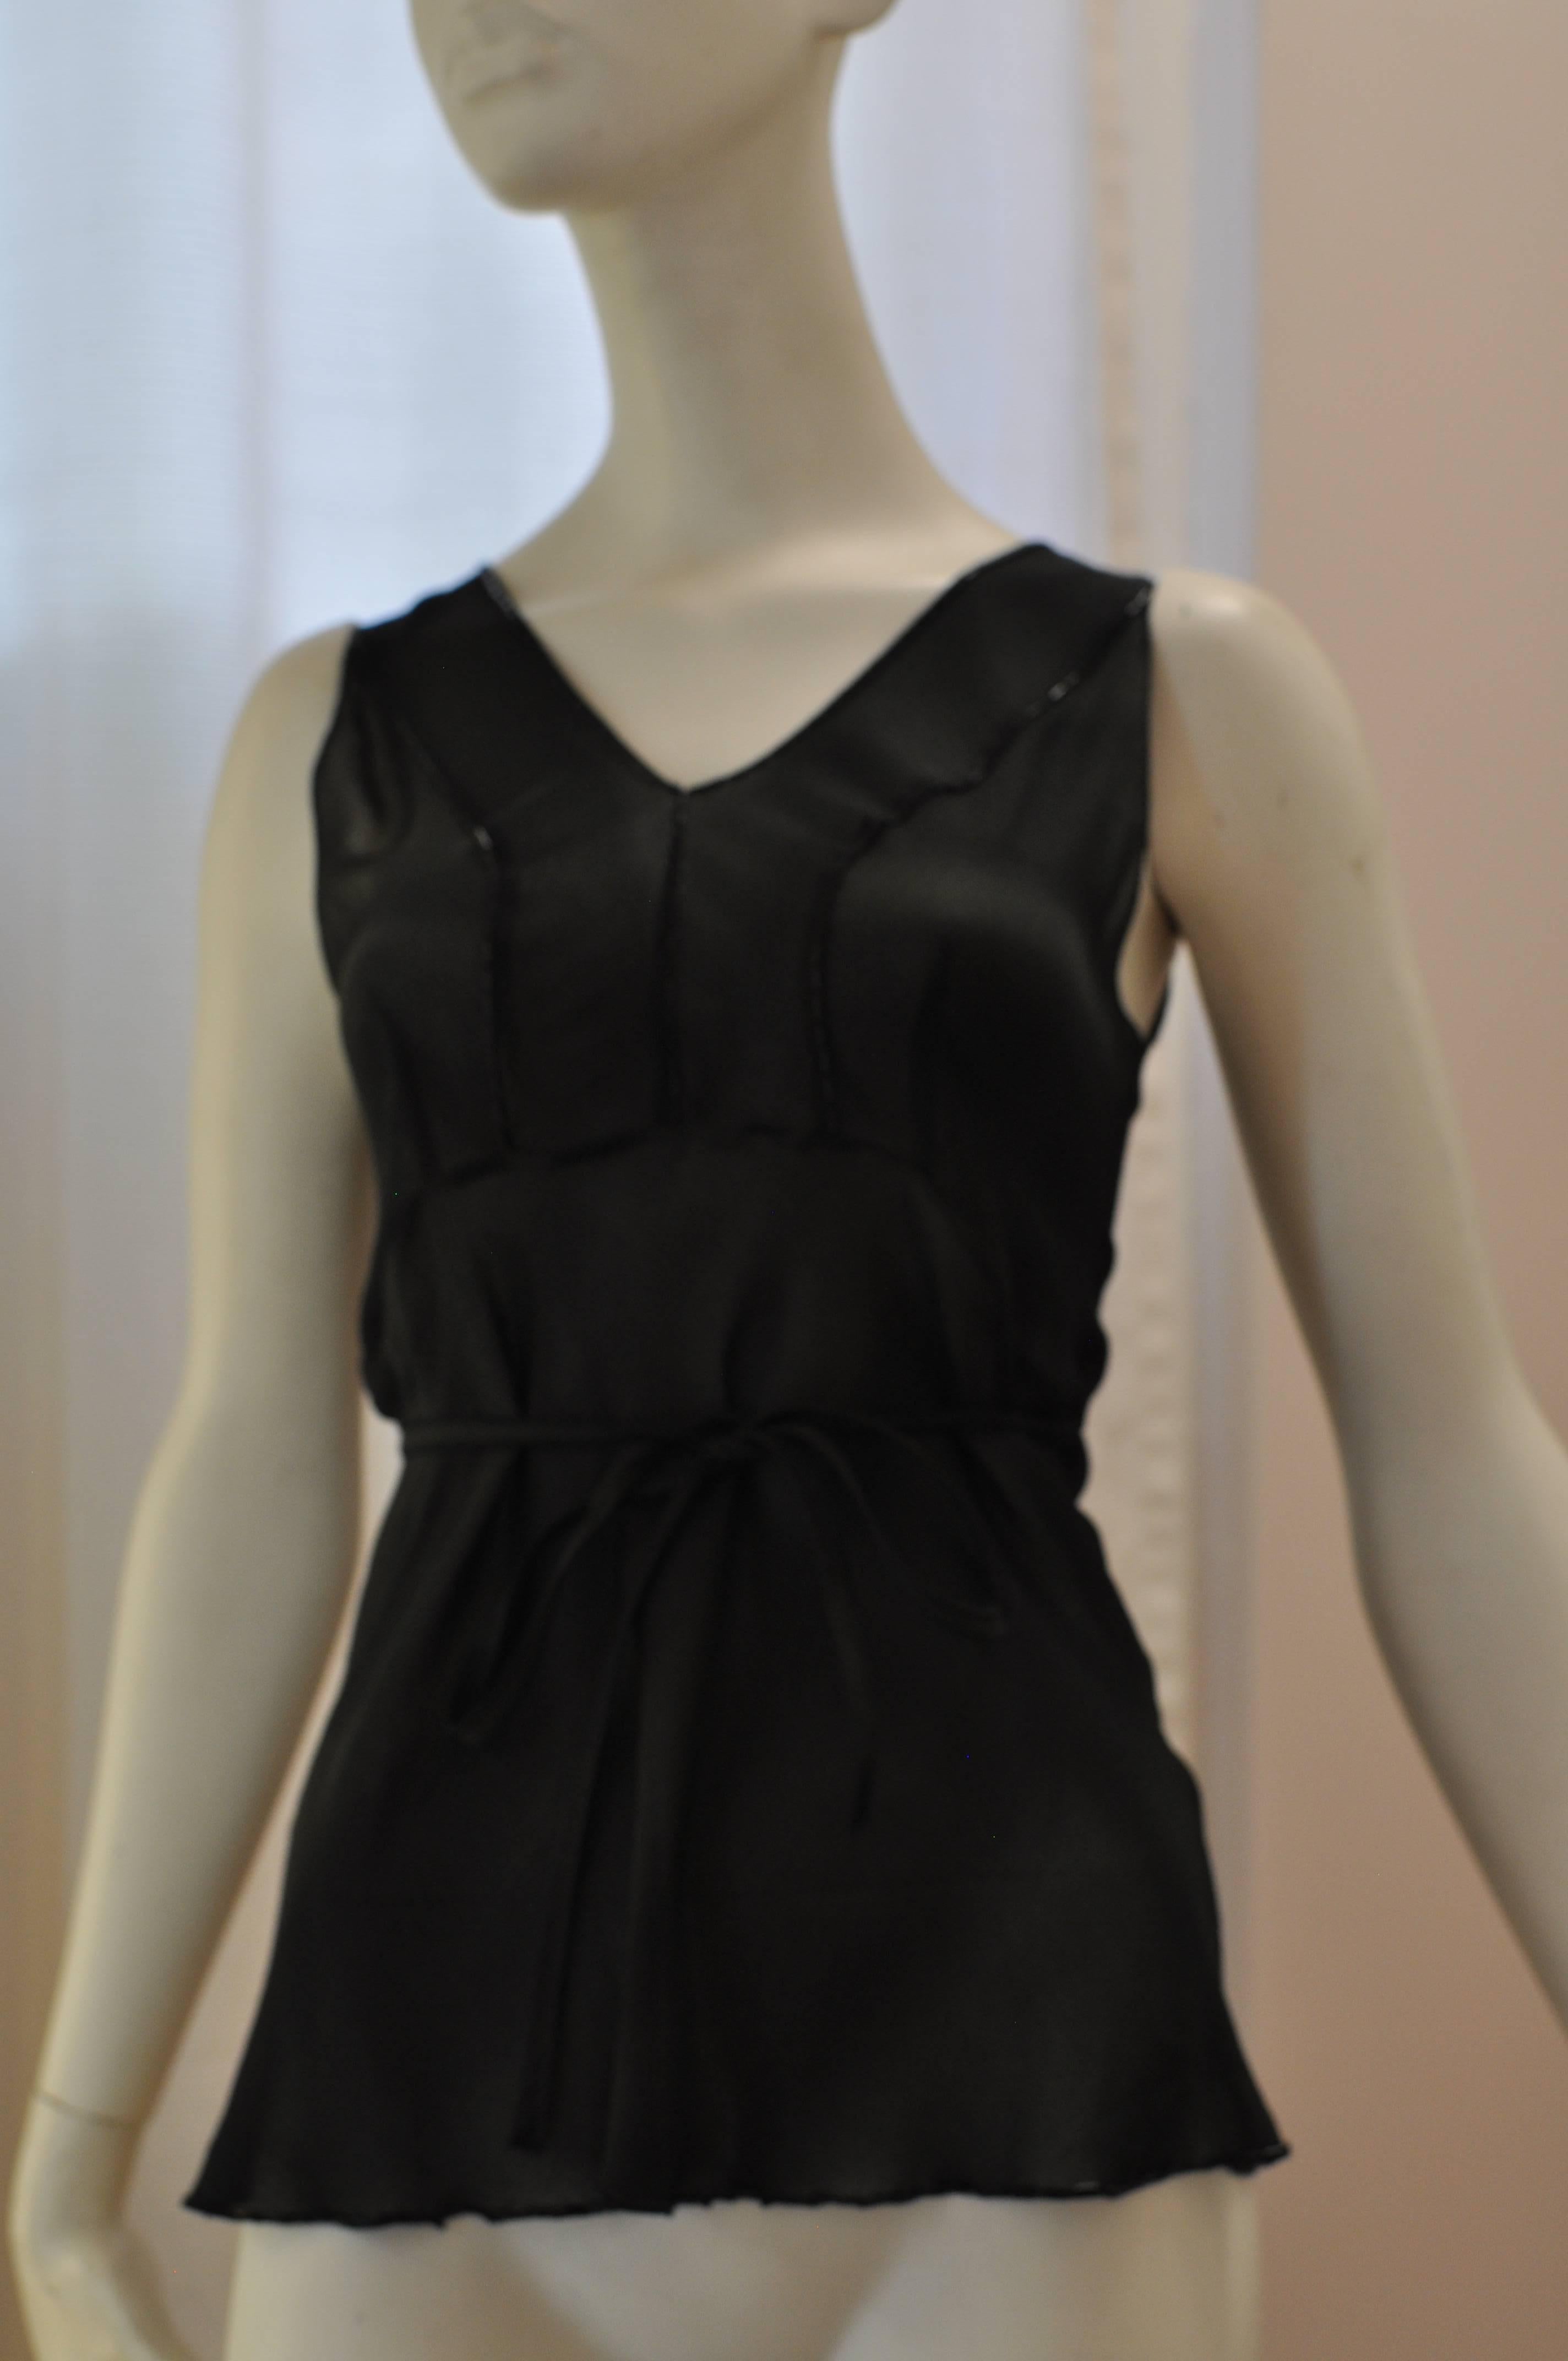 At first glance the color is deceiving, but in the light it is not all black but black and dark green in an assymetrical pattern. The neckline, bodice and hem is beaded and there is an attached thin belt which can be done up at the back or front.  